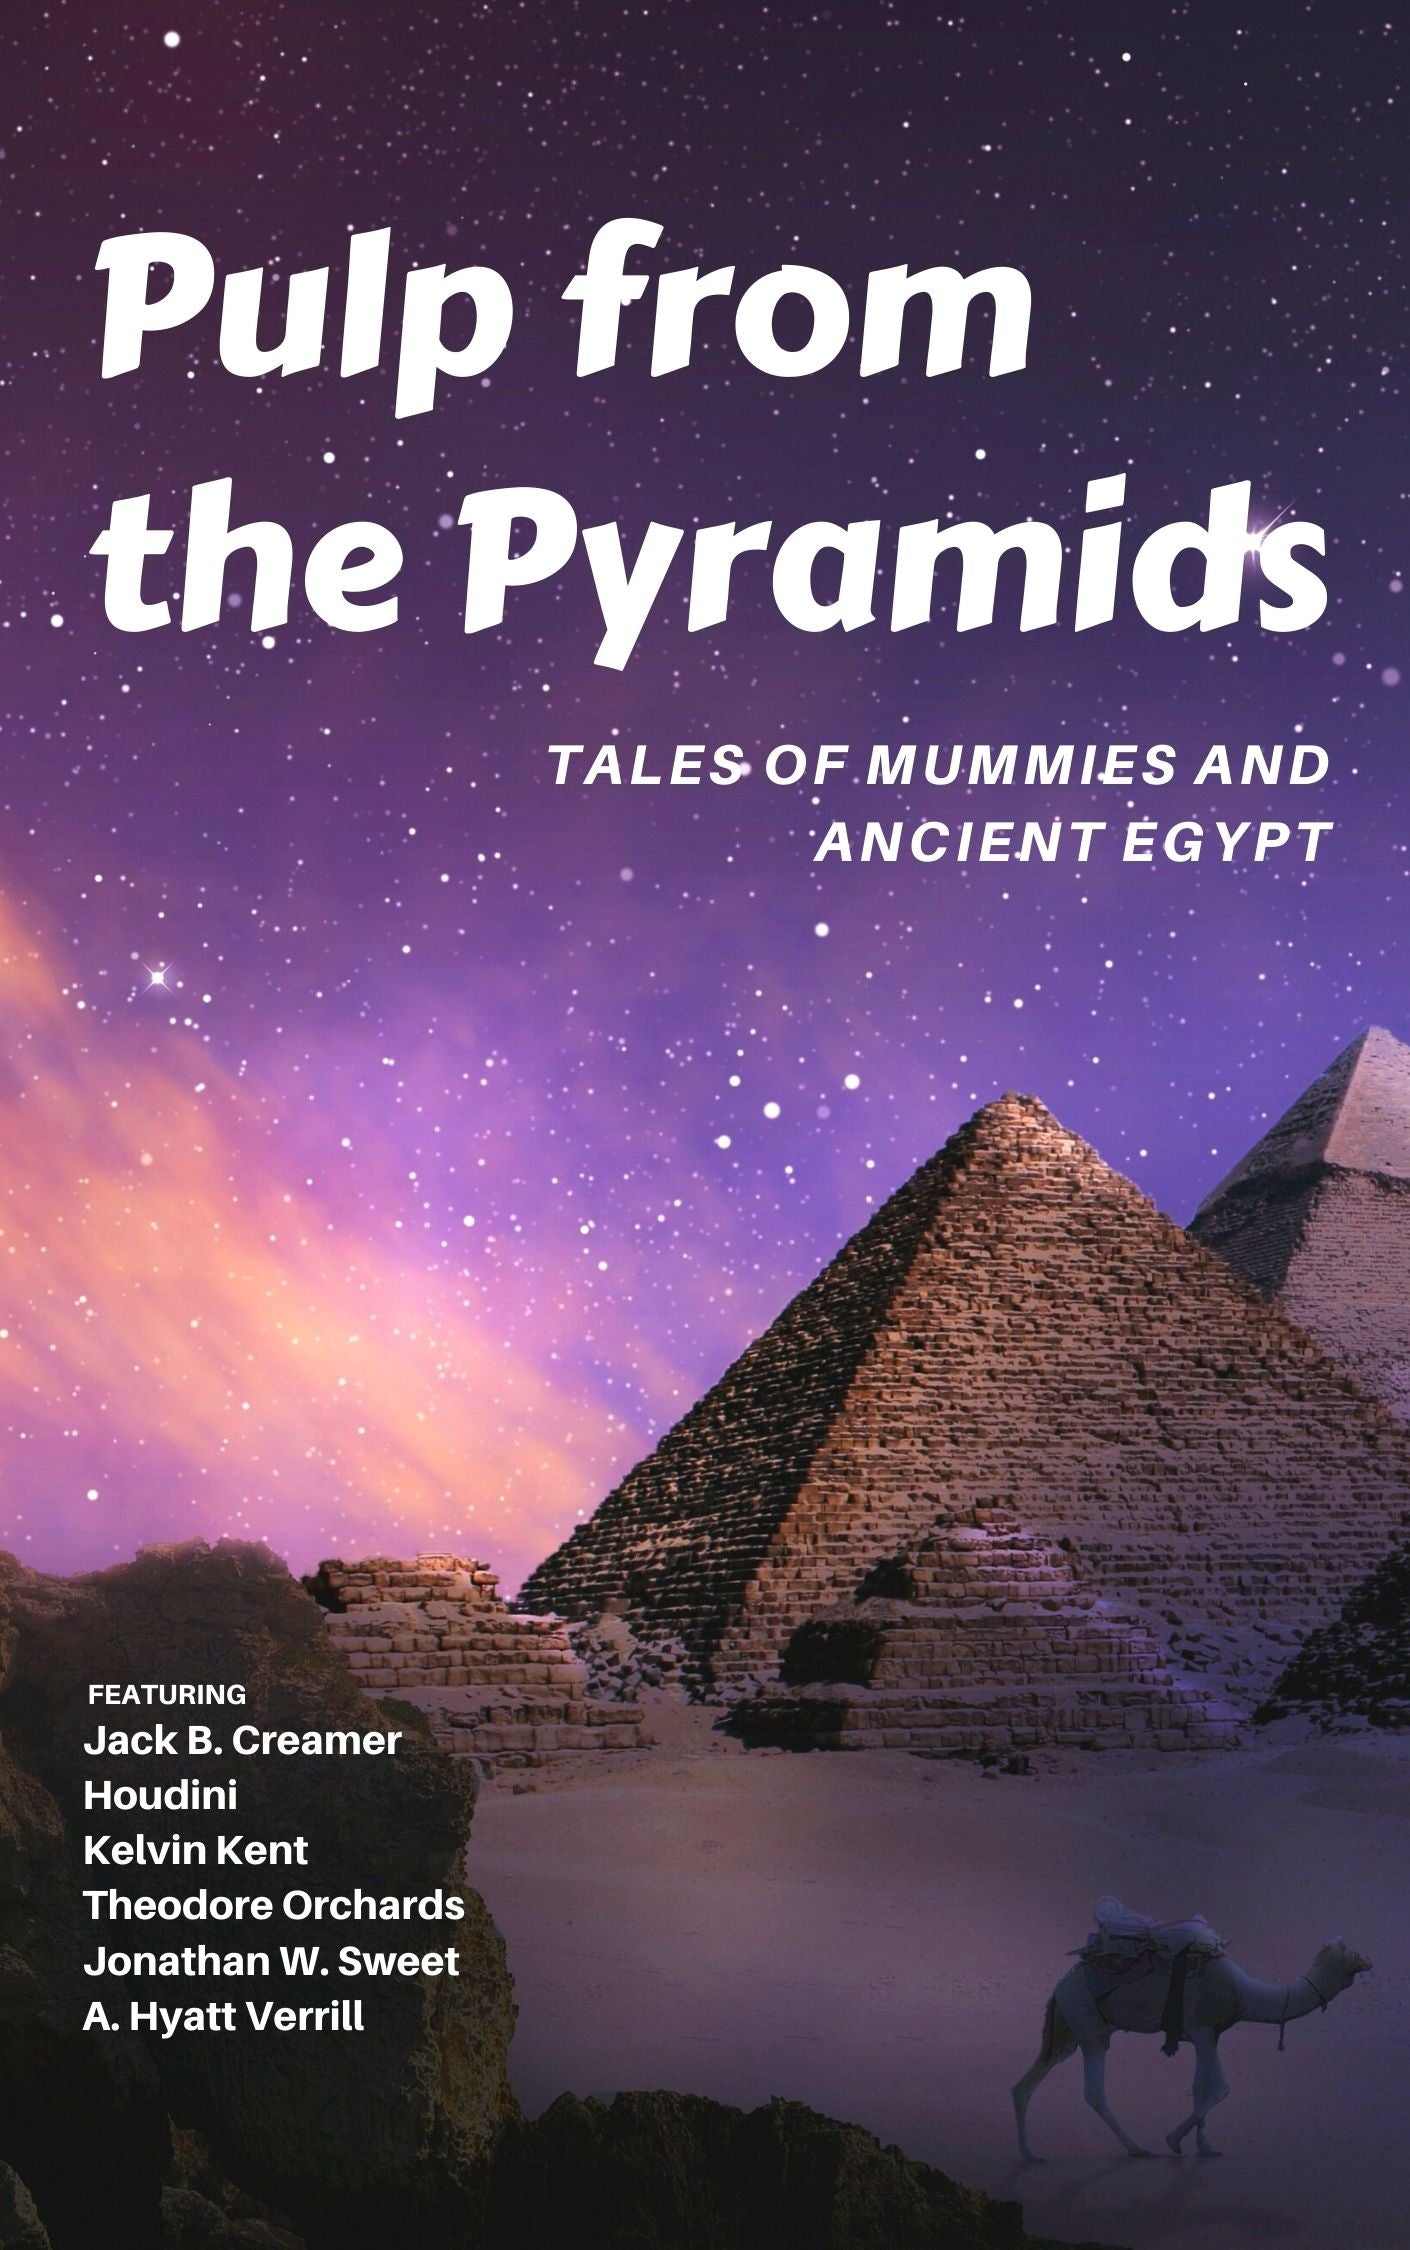 Pulp From the Pyramids: Tales of Mummies and Ancient Egypt